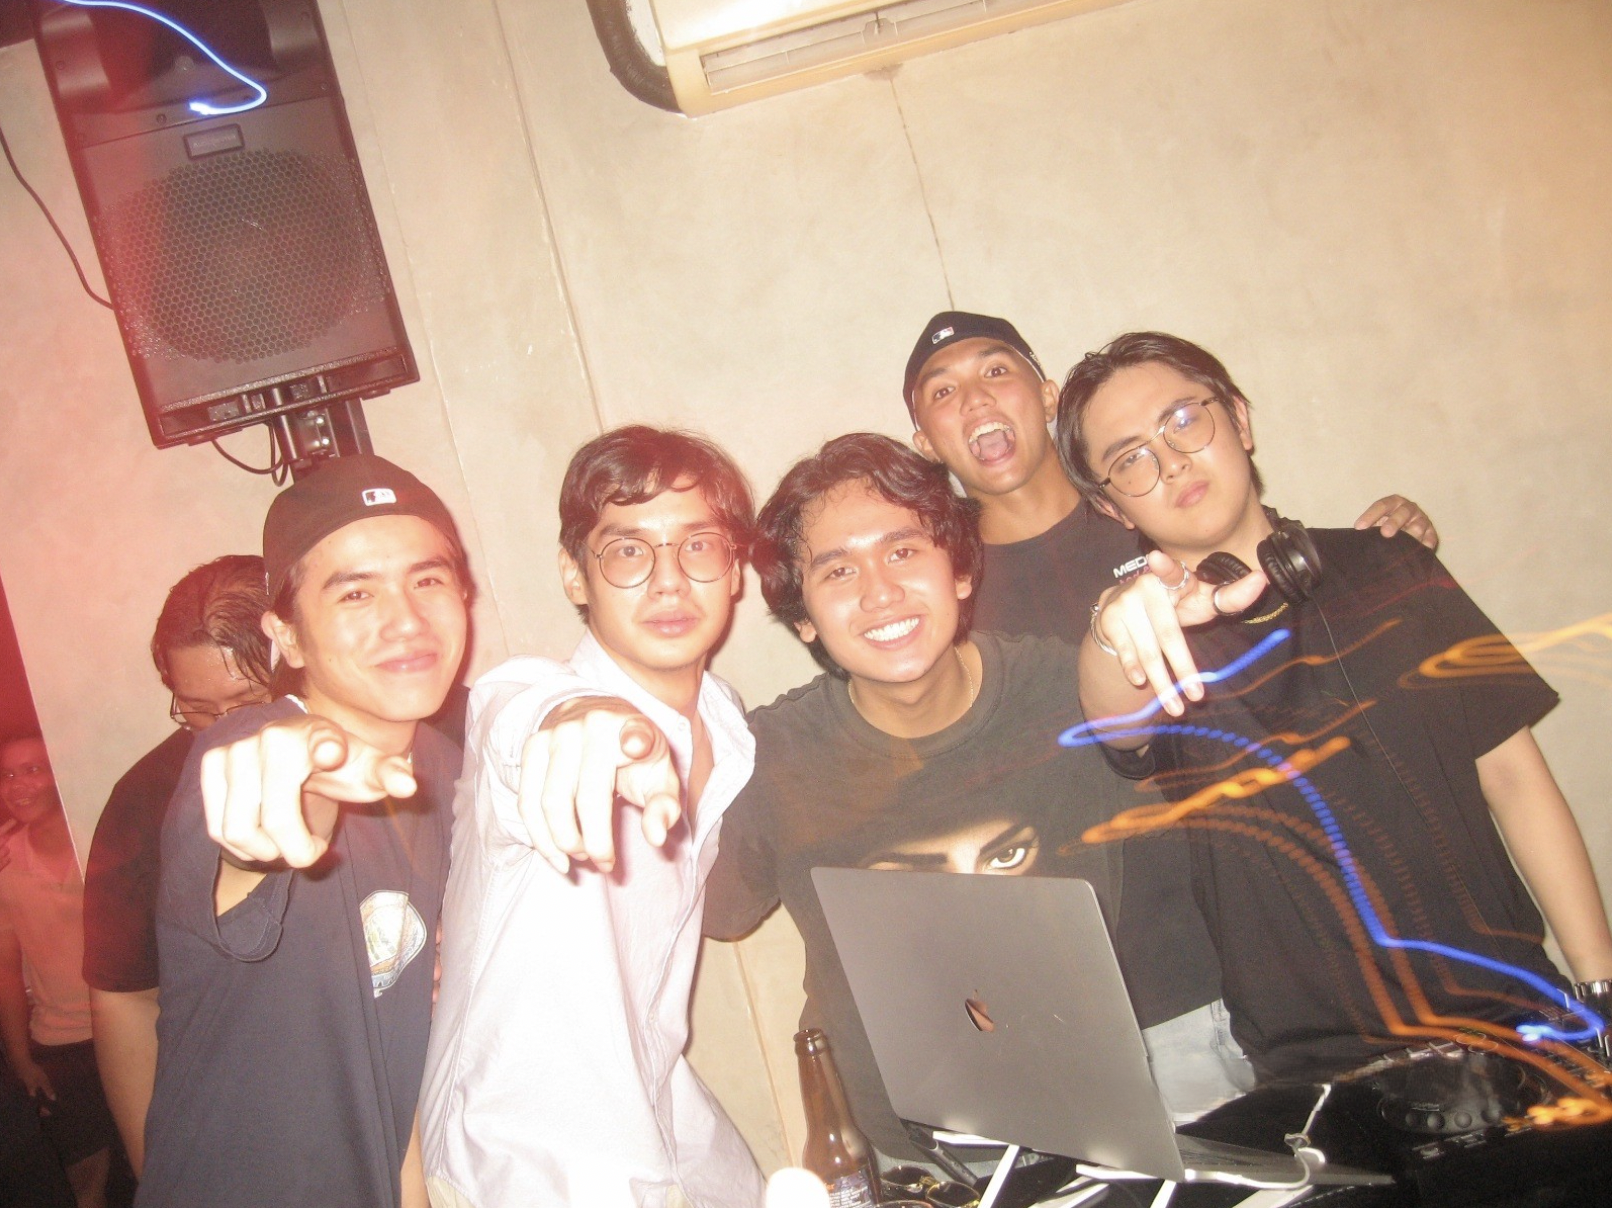 Lan Kwai Speakeasy’s Managing Partners, Emerson Ong, Luca Liza, Reiner Mendoza, and Kean Nerecina, together with their close friend Alfonso Abrogar by the DJ booth